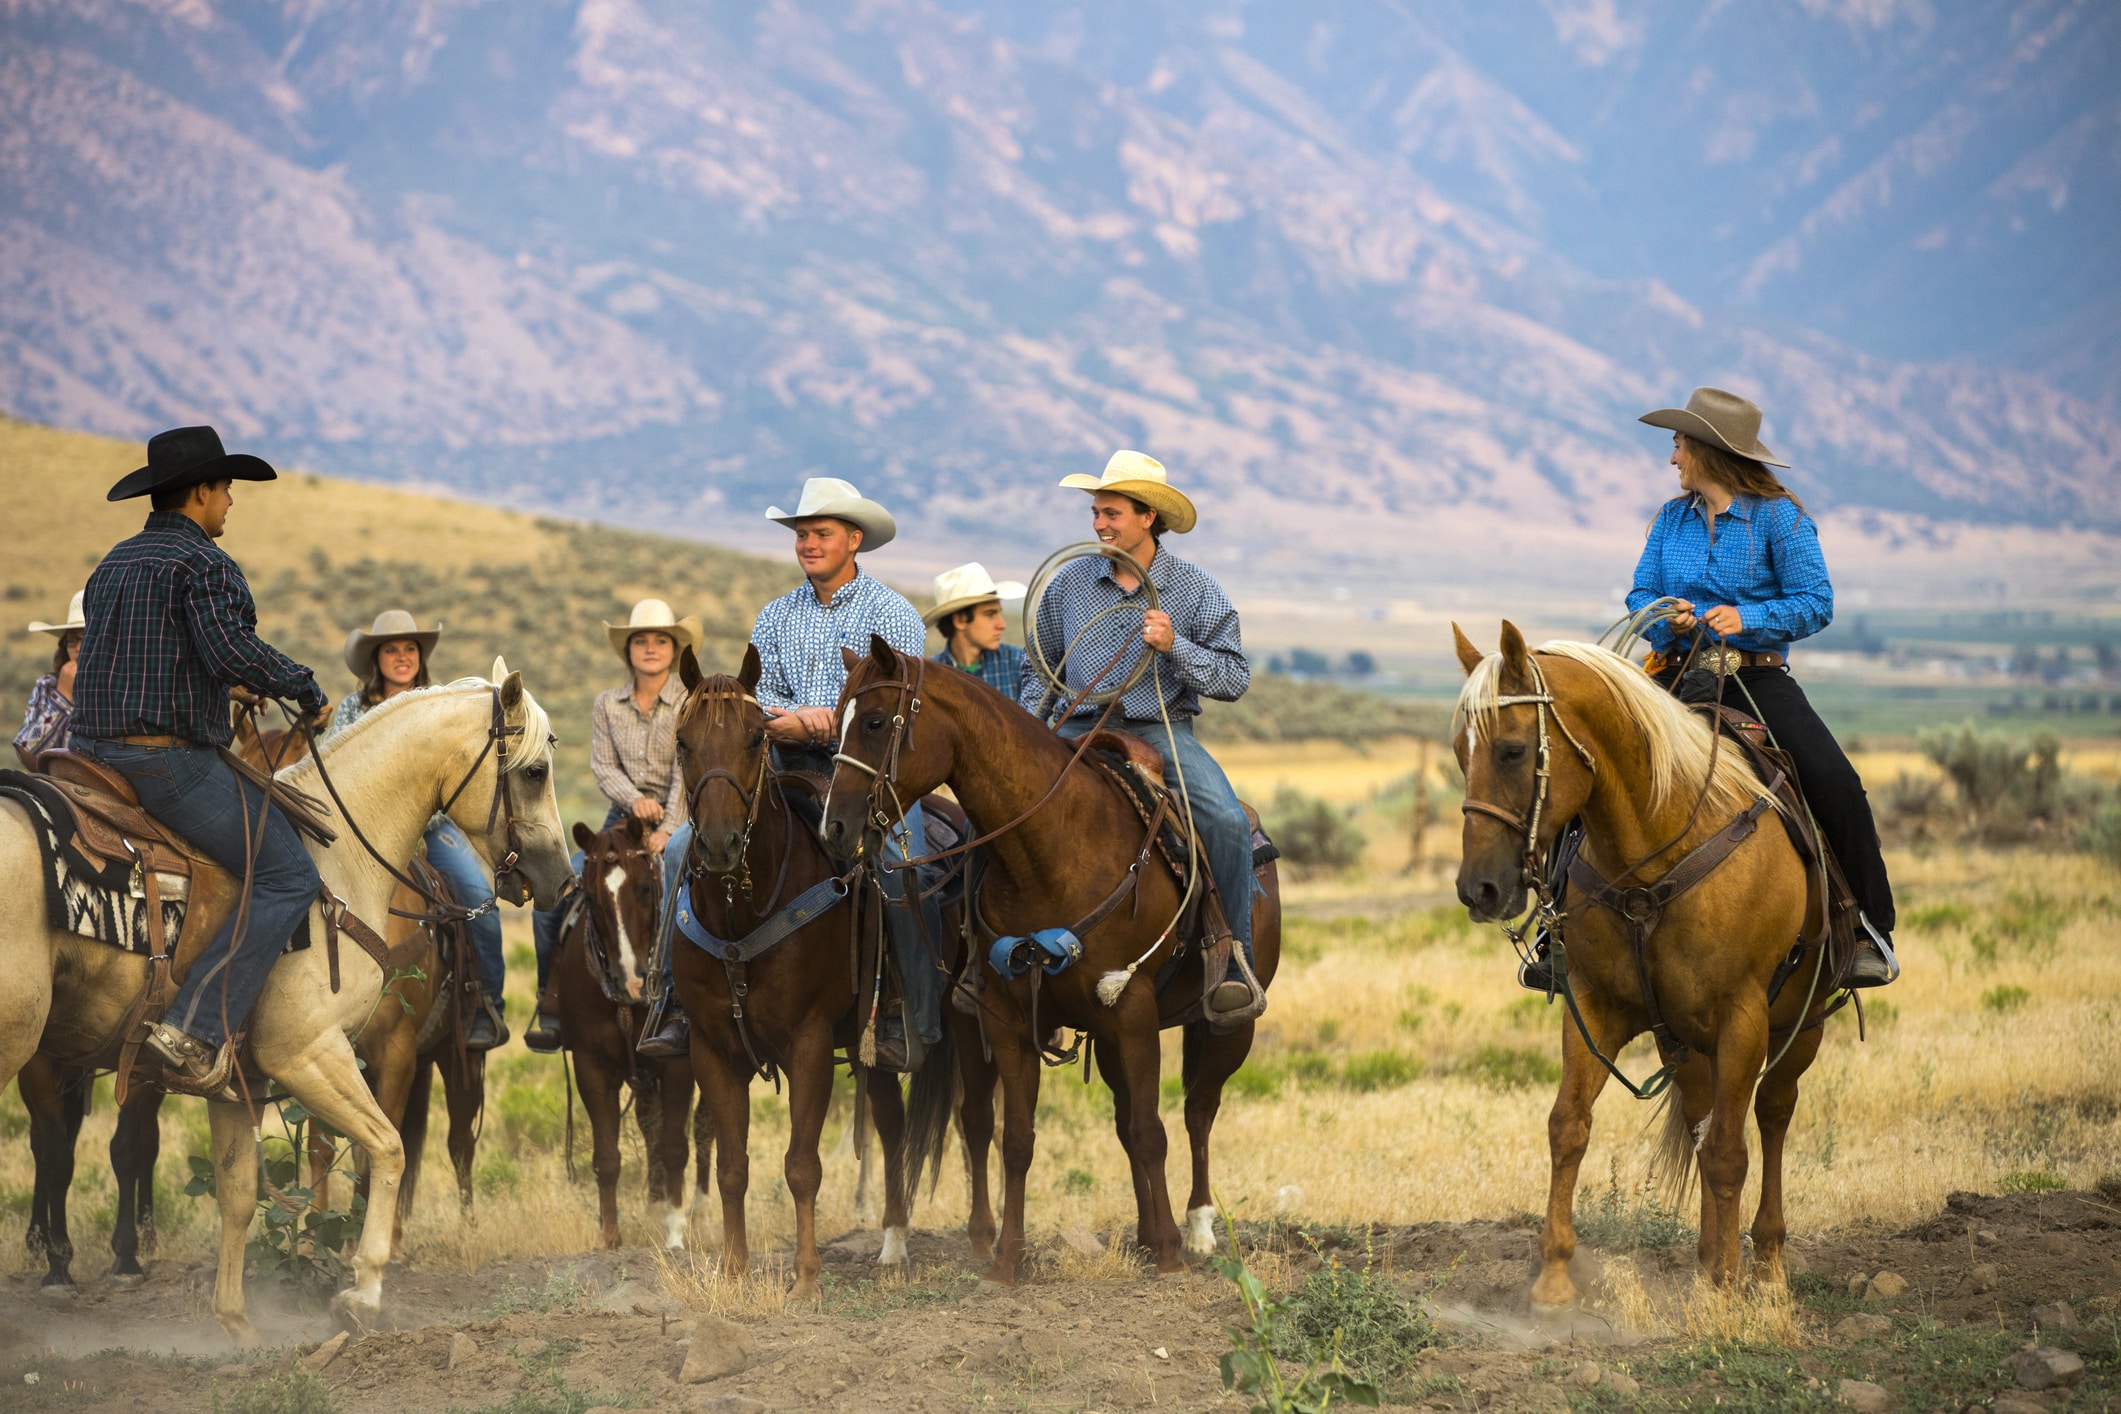 A group of cowboys in the American west.